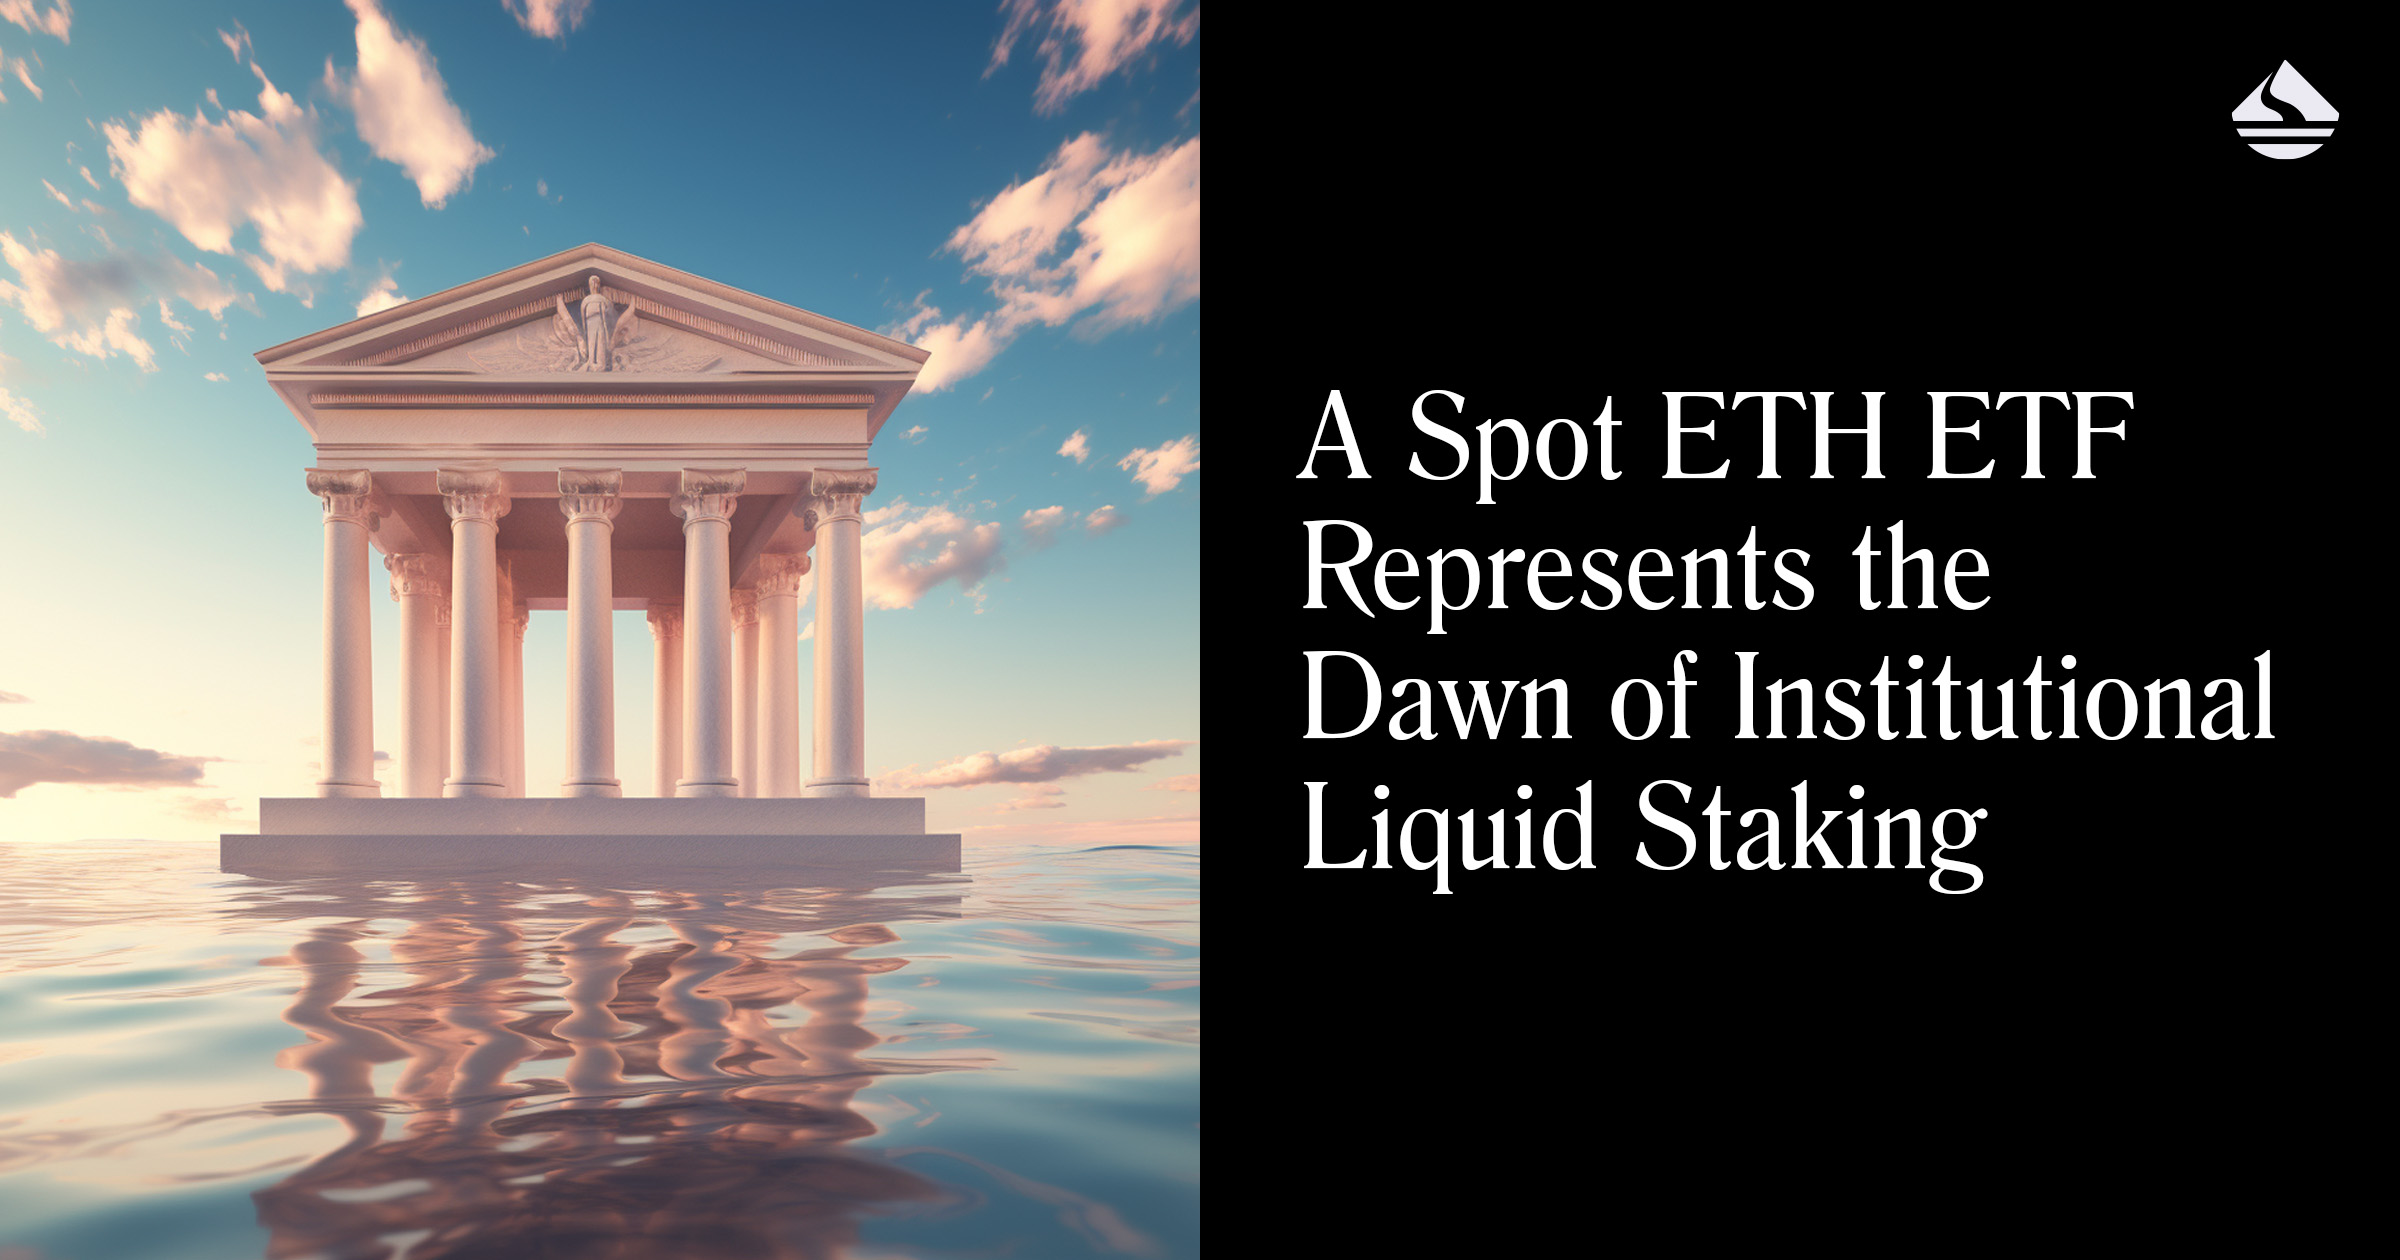 A Spot ETH ETF Represents the Dawn of Institutional Liquid Staking